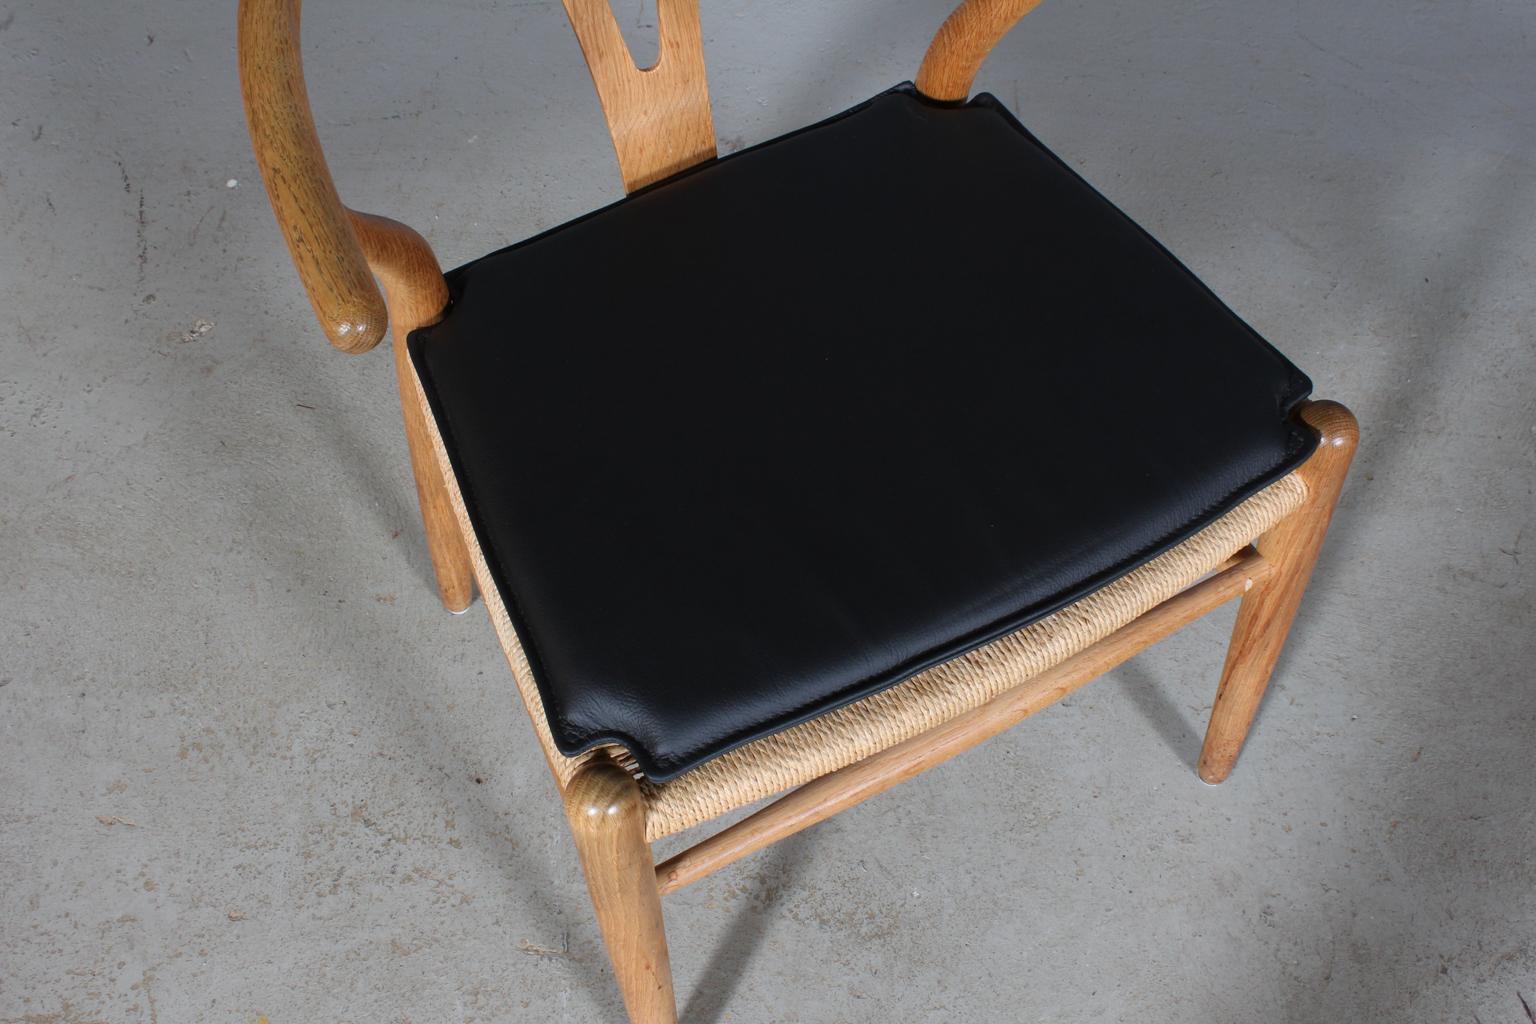 Hans J. Wegner cushions for wishbone chair model CH24.

Made in black leather and good quality foam.

Only the cushion, not the chair.